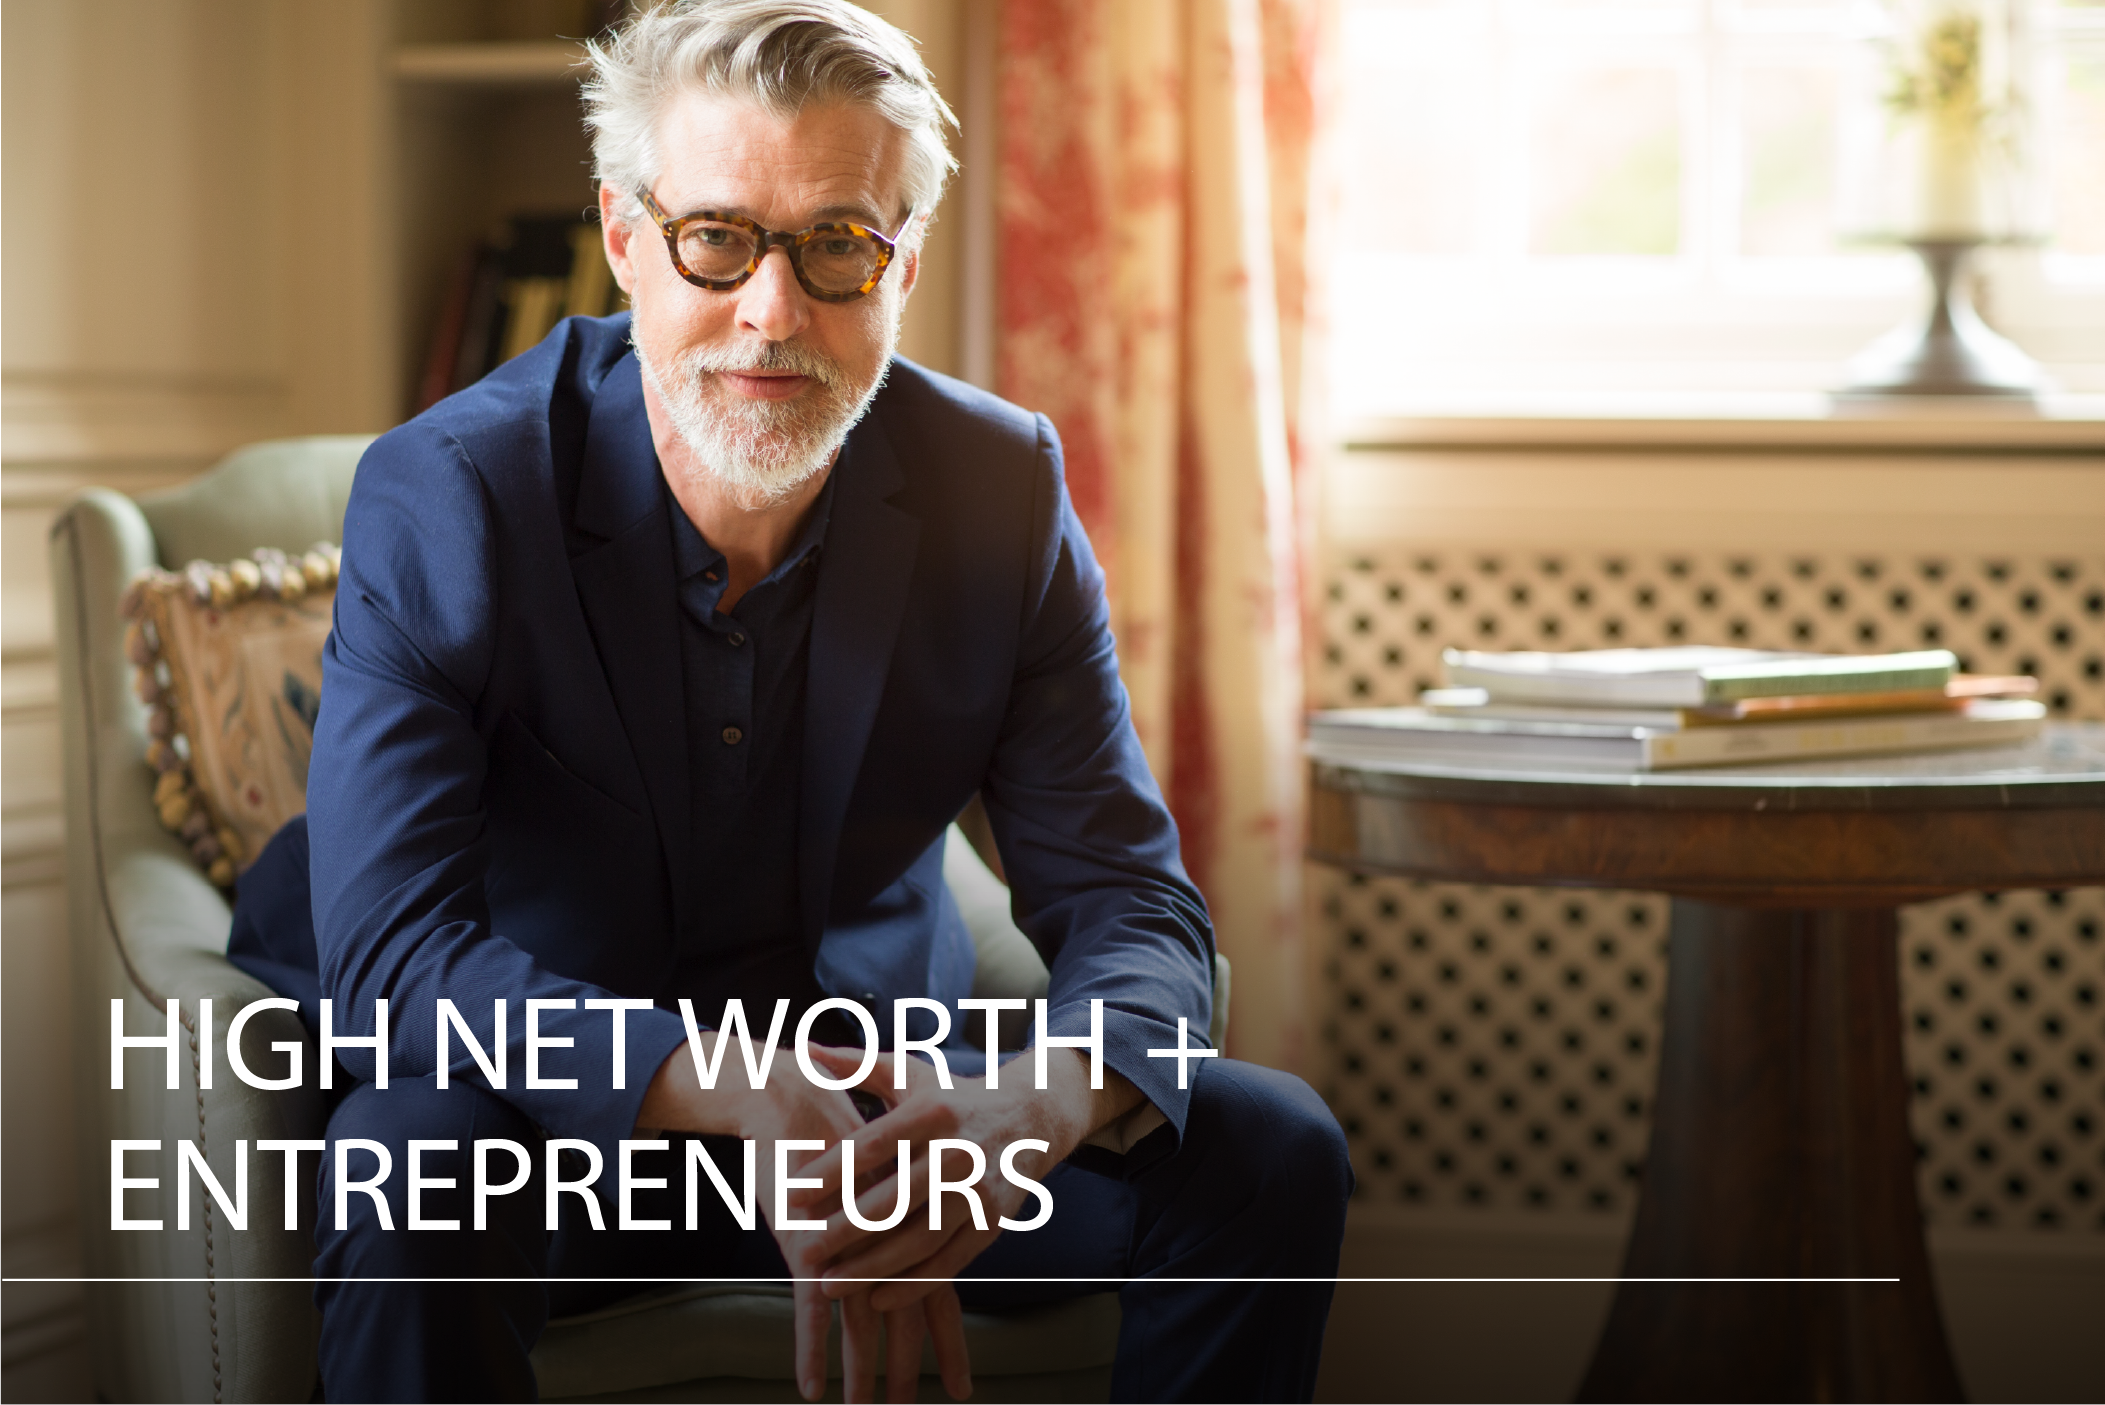 HIGH NET WORTH + ENTREPRENEURS</u> We help you make the wisest choices for you and your family.